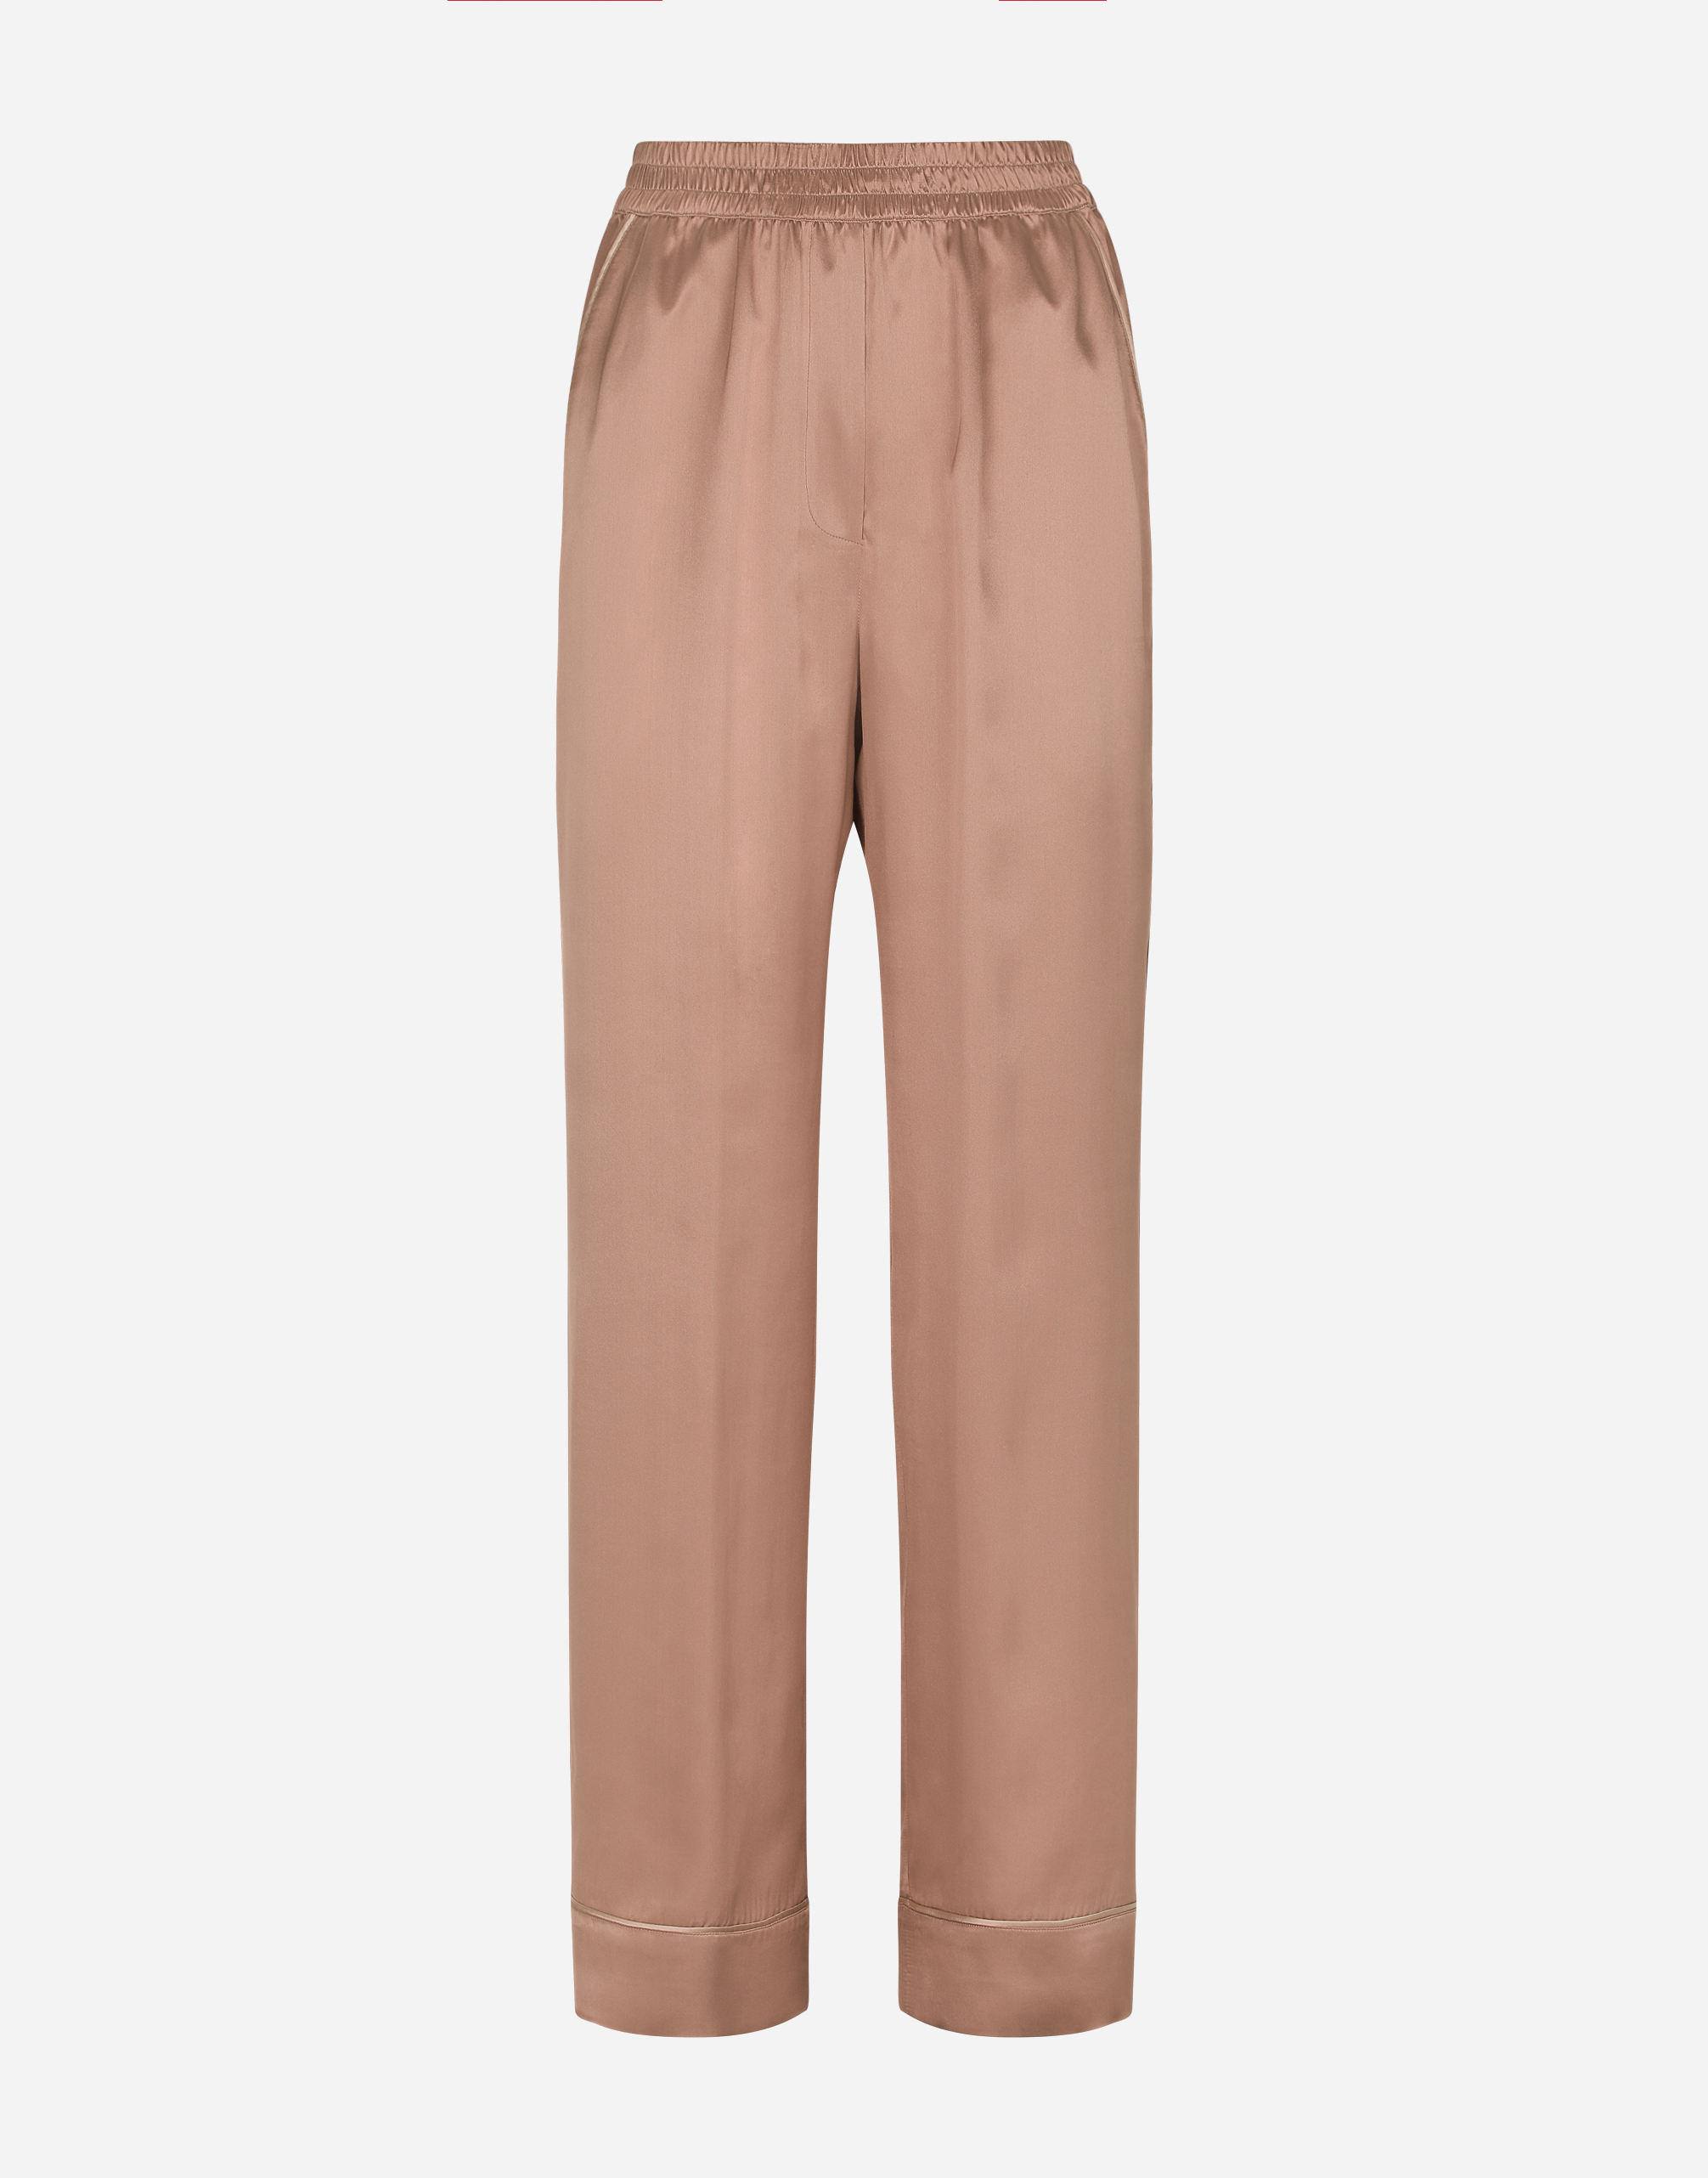 Satin pajama pants with piping in Brown